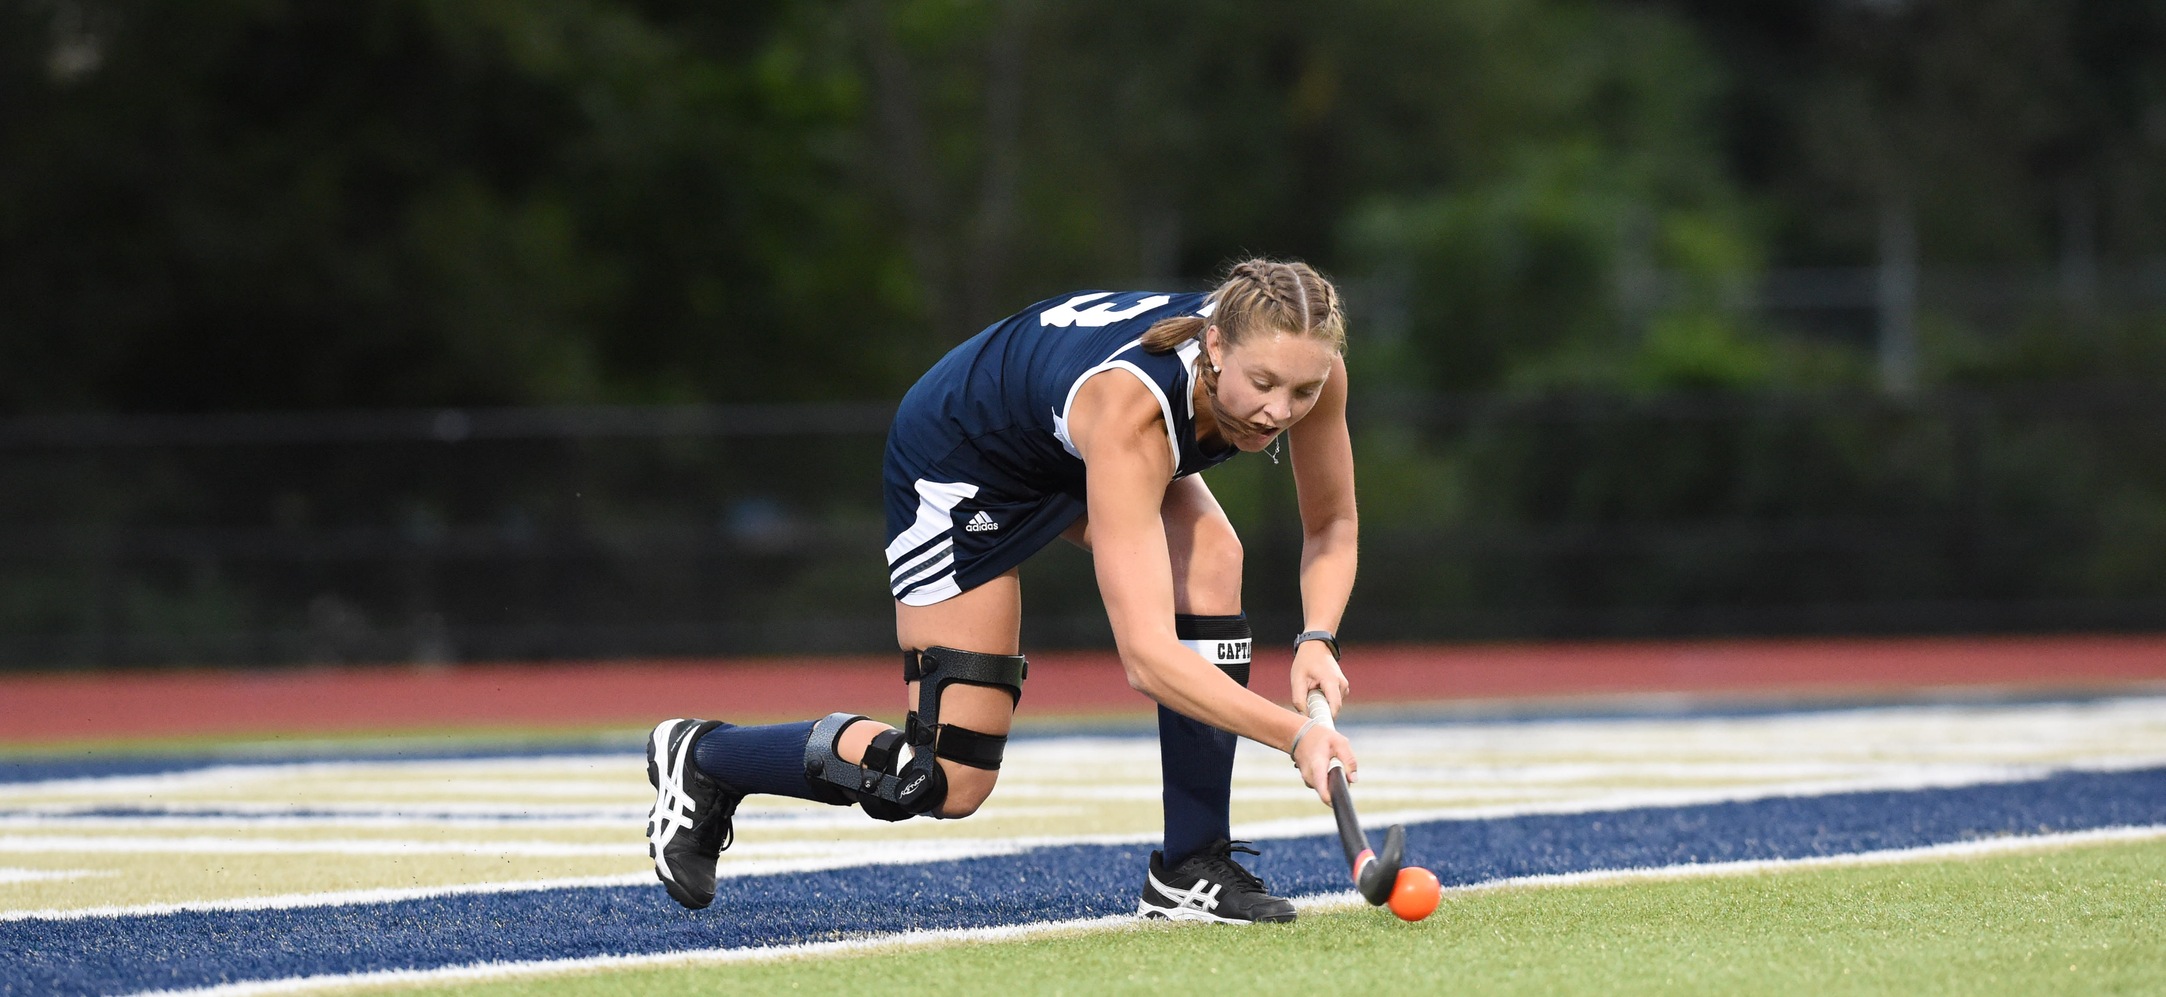 Katie Alexander Nets Hat Trick as Eagles Dominate Bobcats